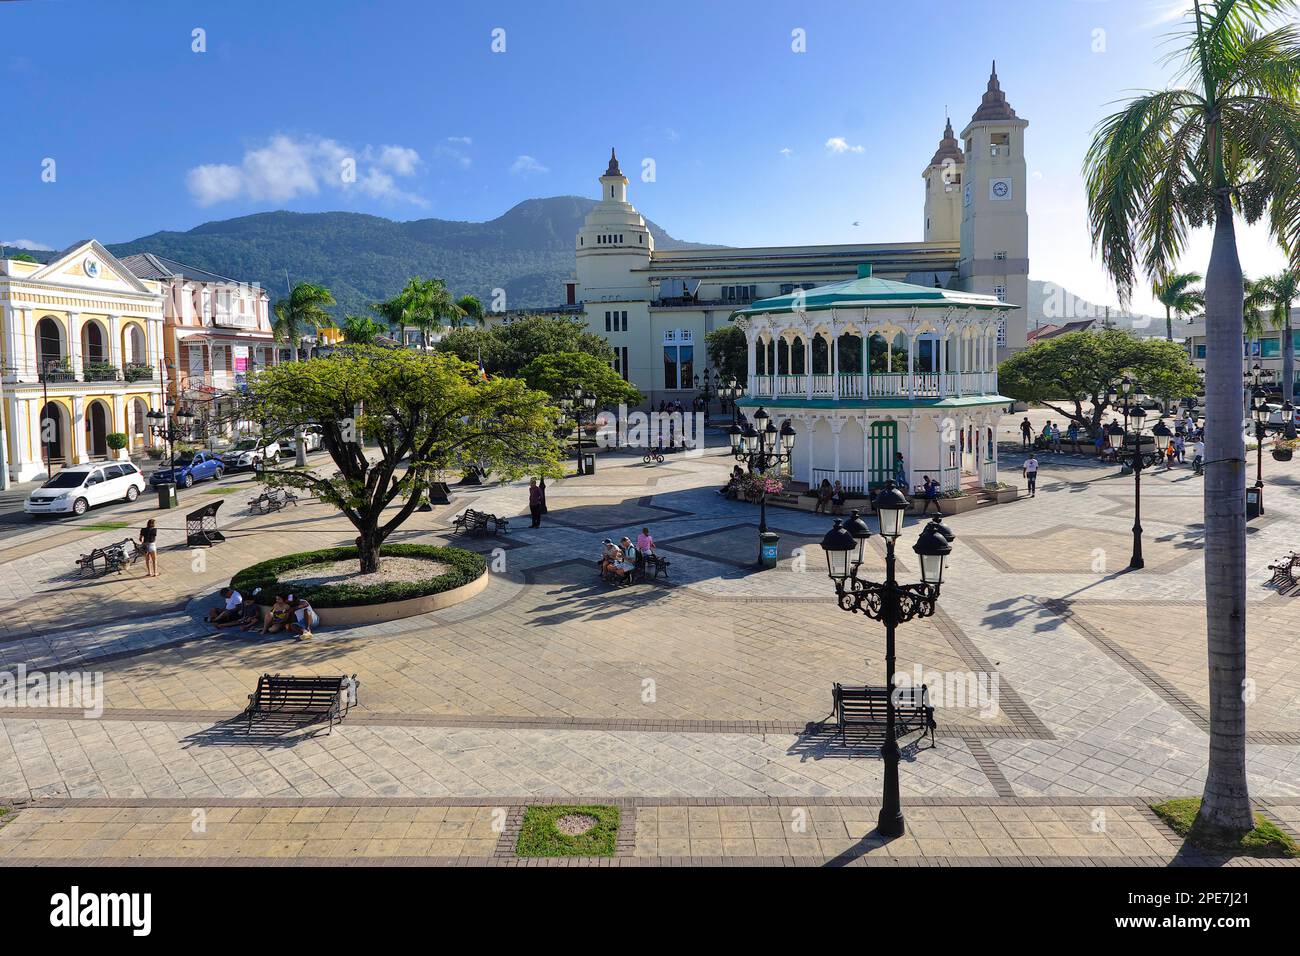 View of the Parque Independenzia, with Pavilion and Cathedale de San Felipe Apostolo in the Centro Historico, Old Town of Puerto Plata, Dominican Stock Photo